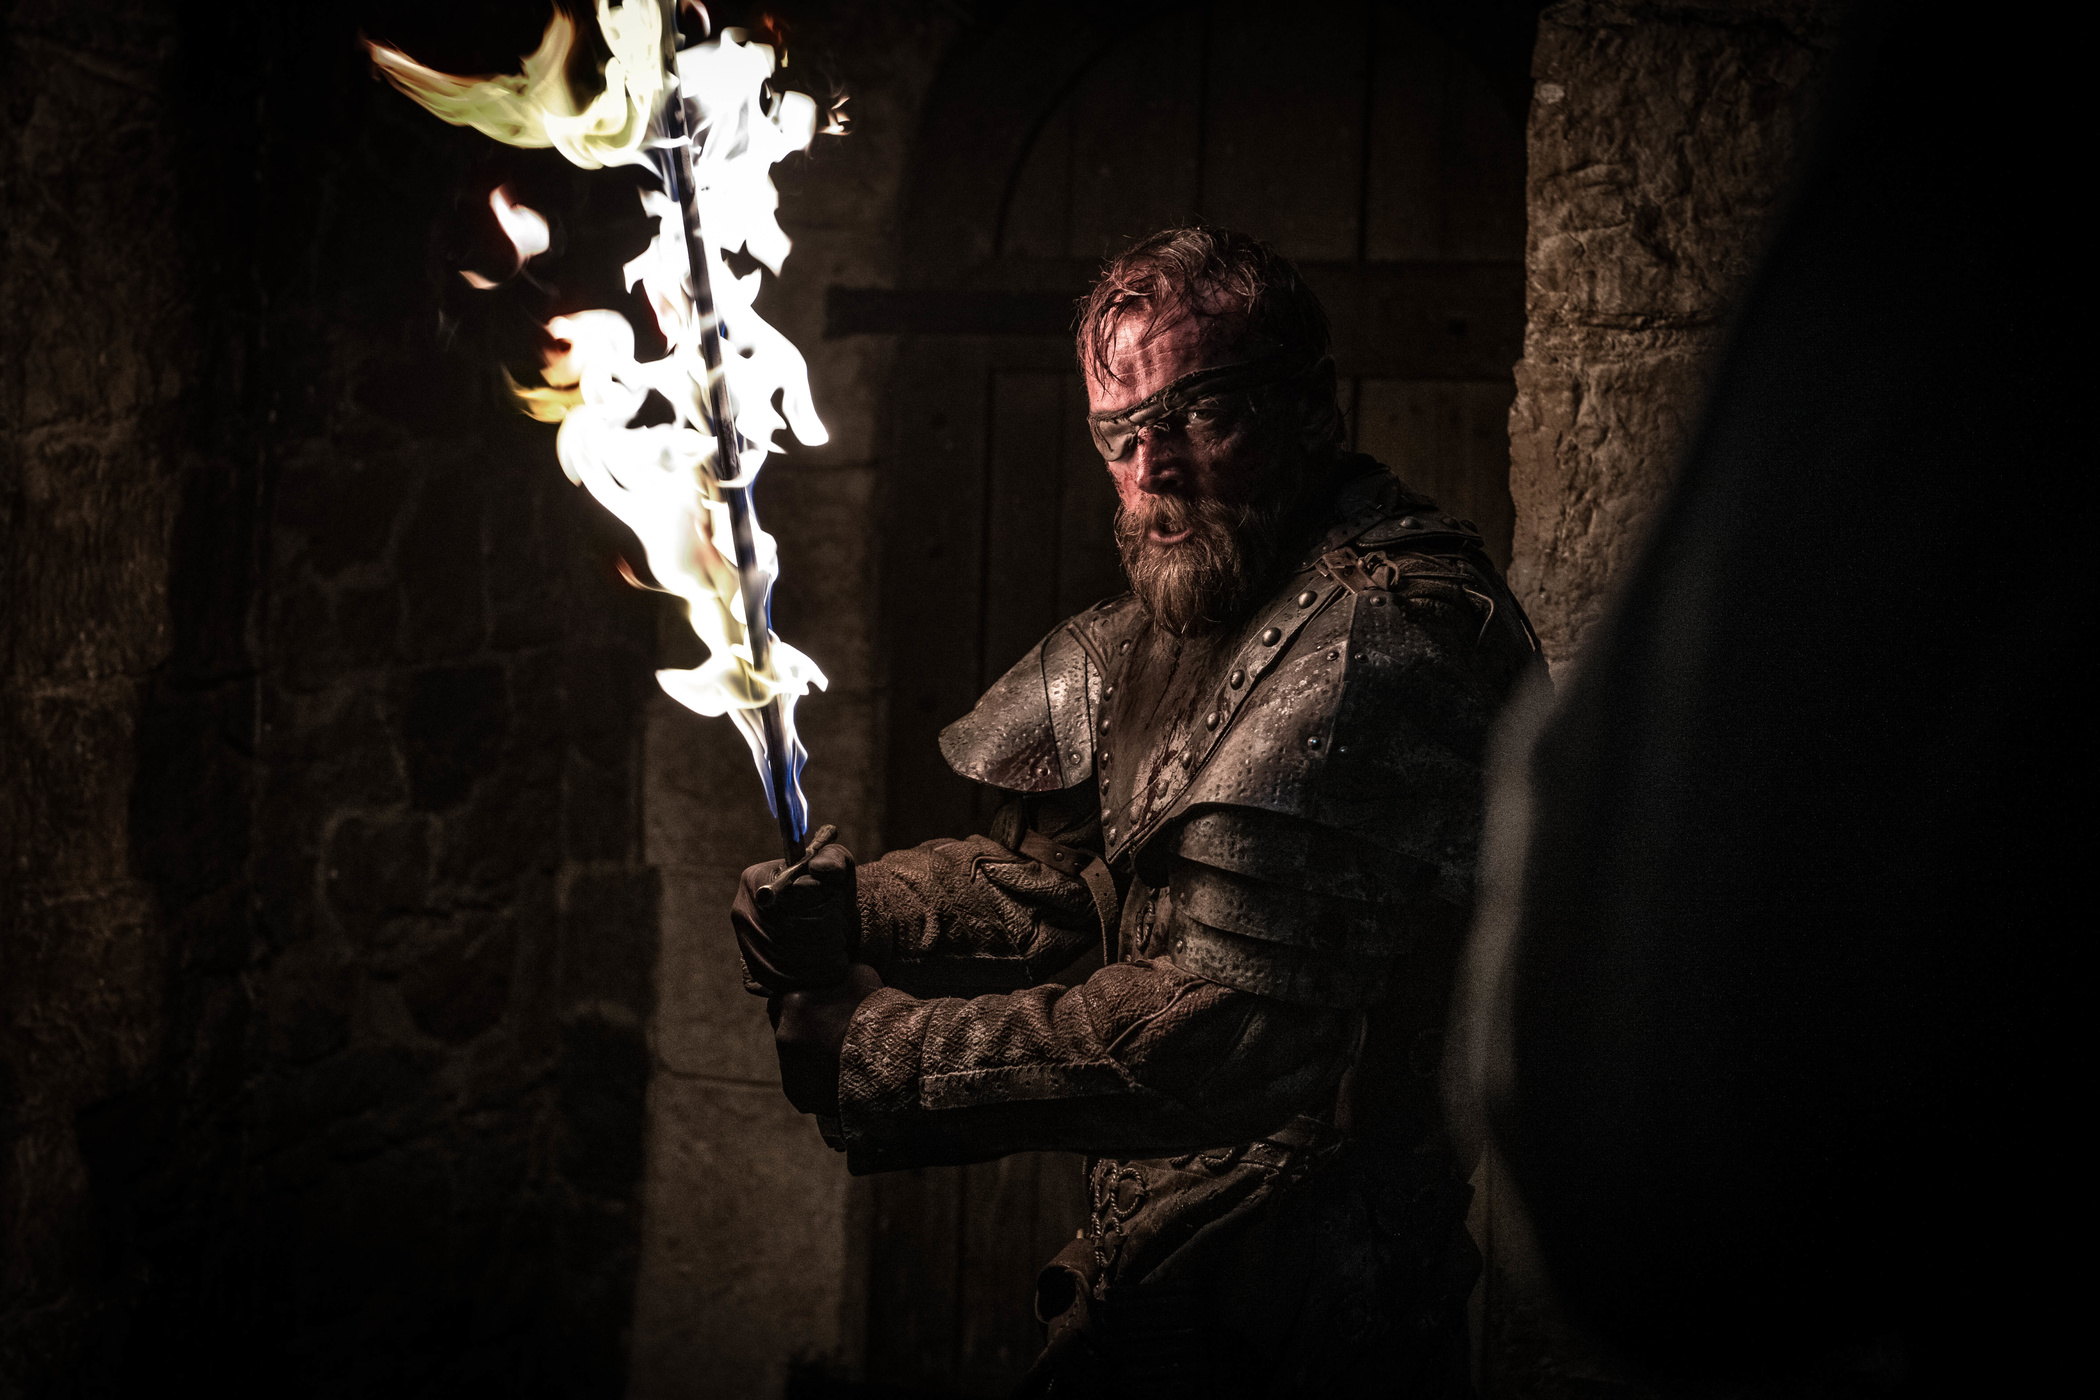 Beric dies in the Game of Thrones' Battle of Winterfell